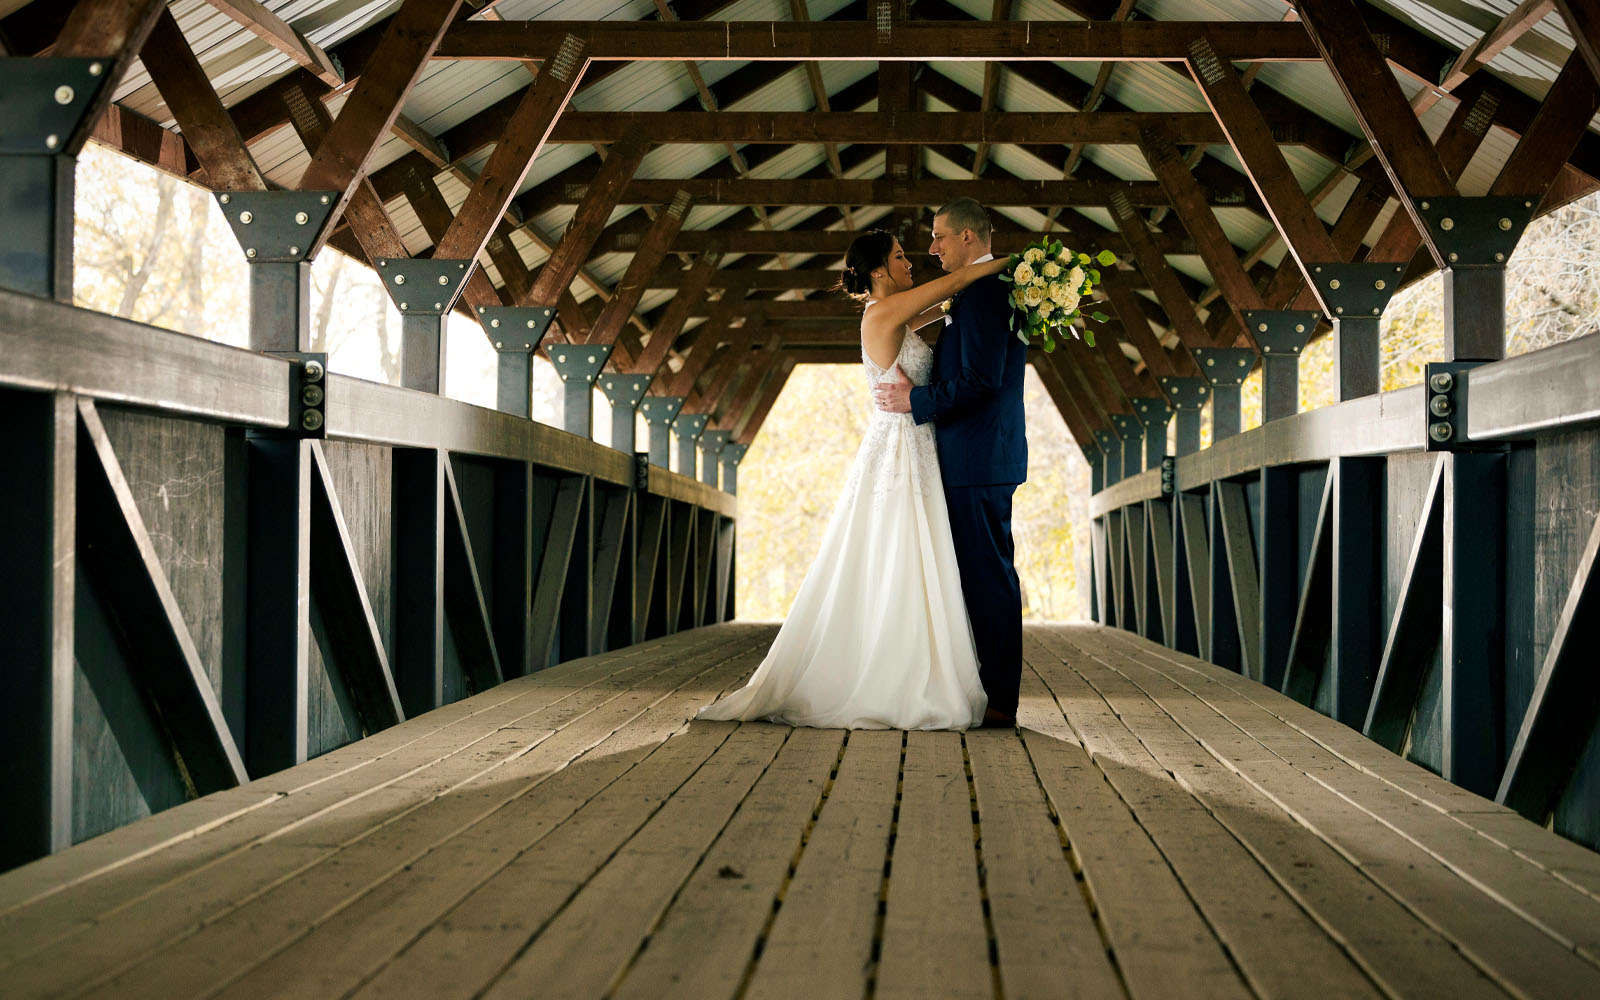 The bride and groom embracing under the canopy of one of the many bridges at Bridges Golf Course